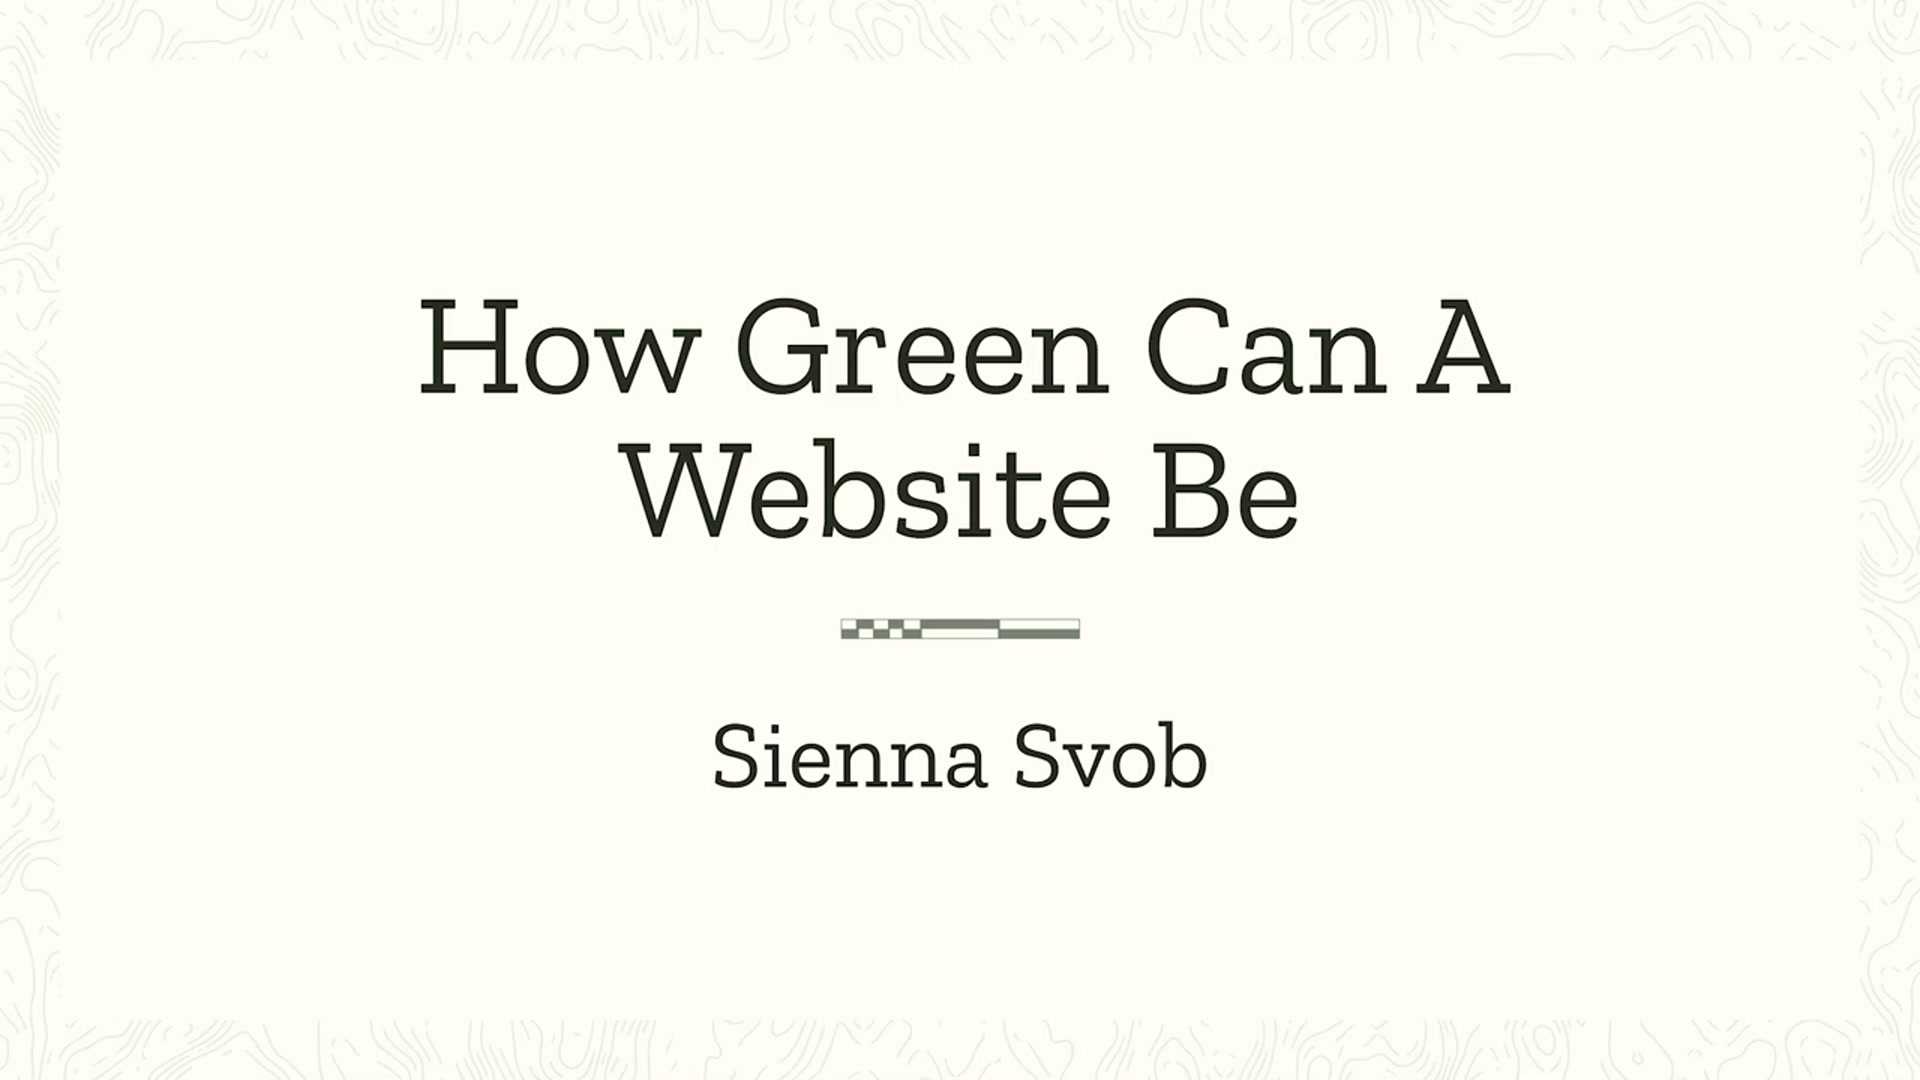 Sienna Svob: How Green Can a Website Be?